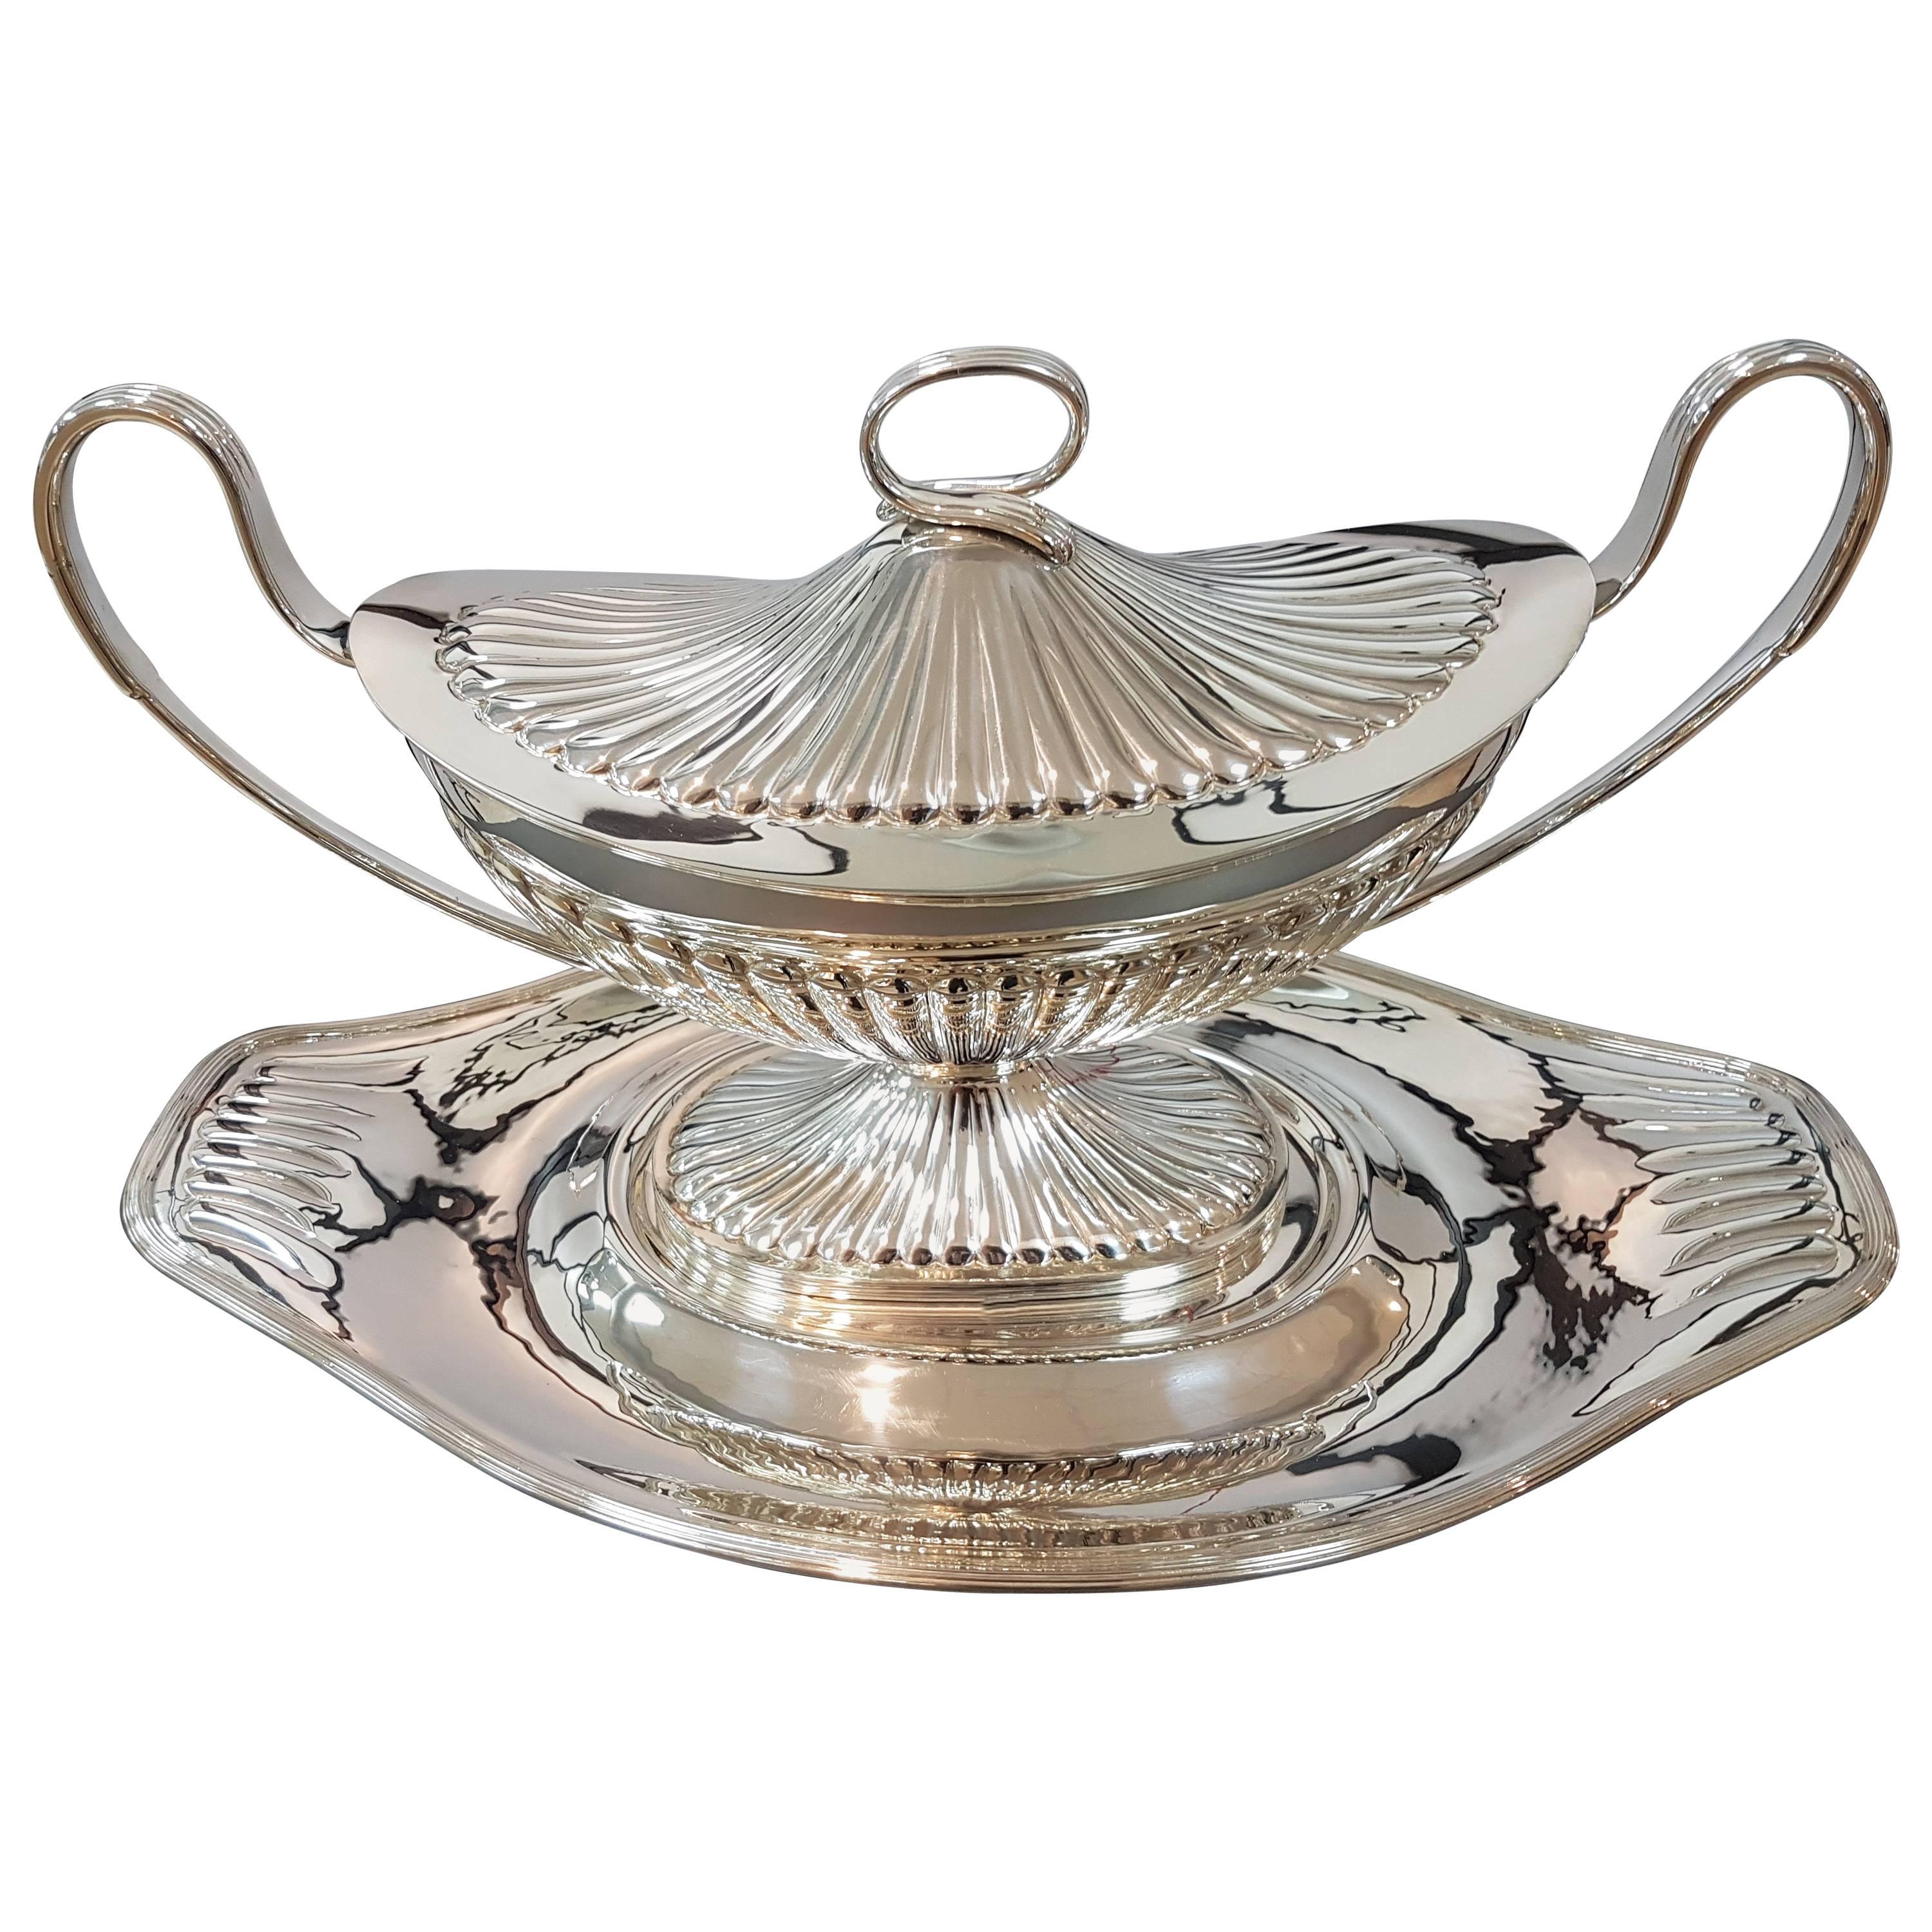 20th Century Italian Silver Tureen & Tray Adams revival. Enbossed ceased by hand For Sale